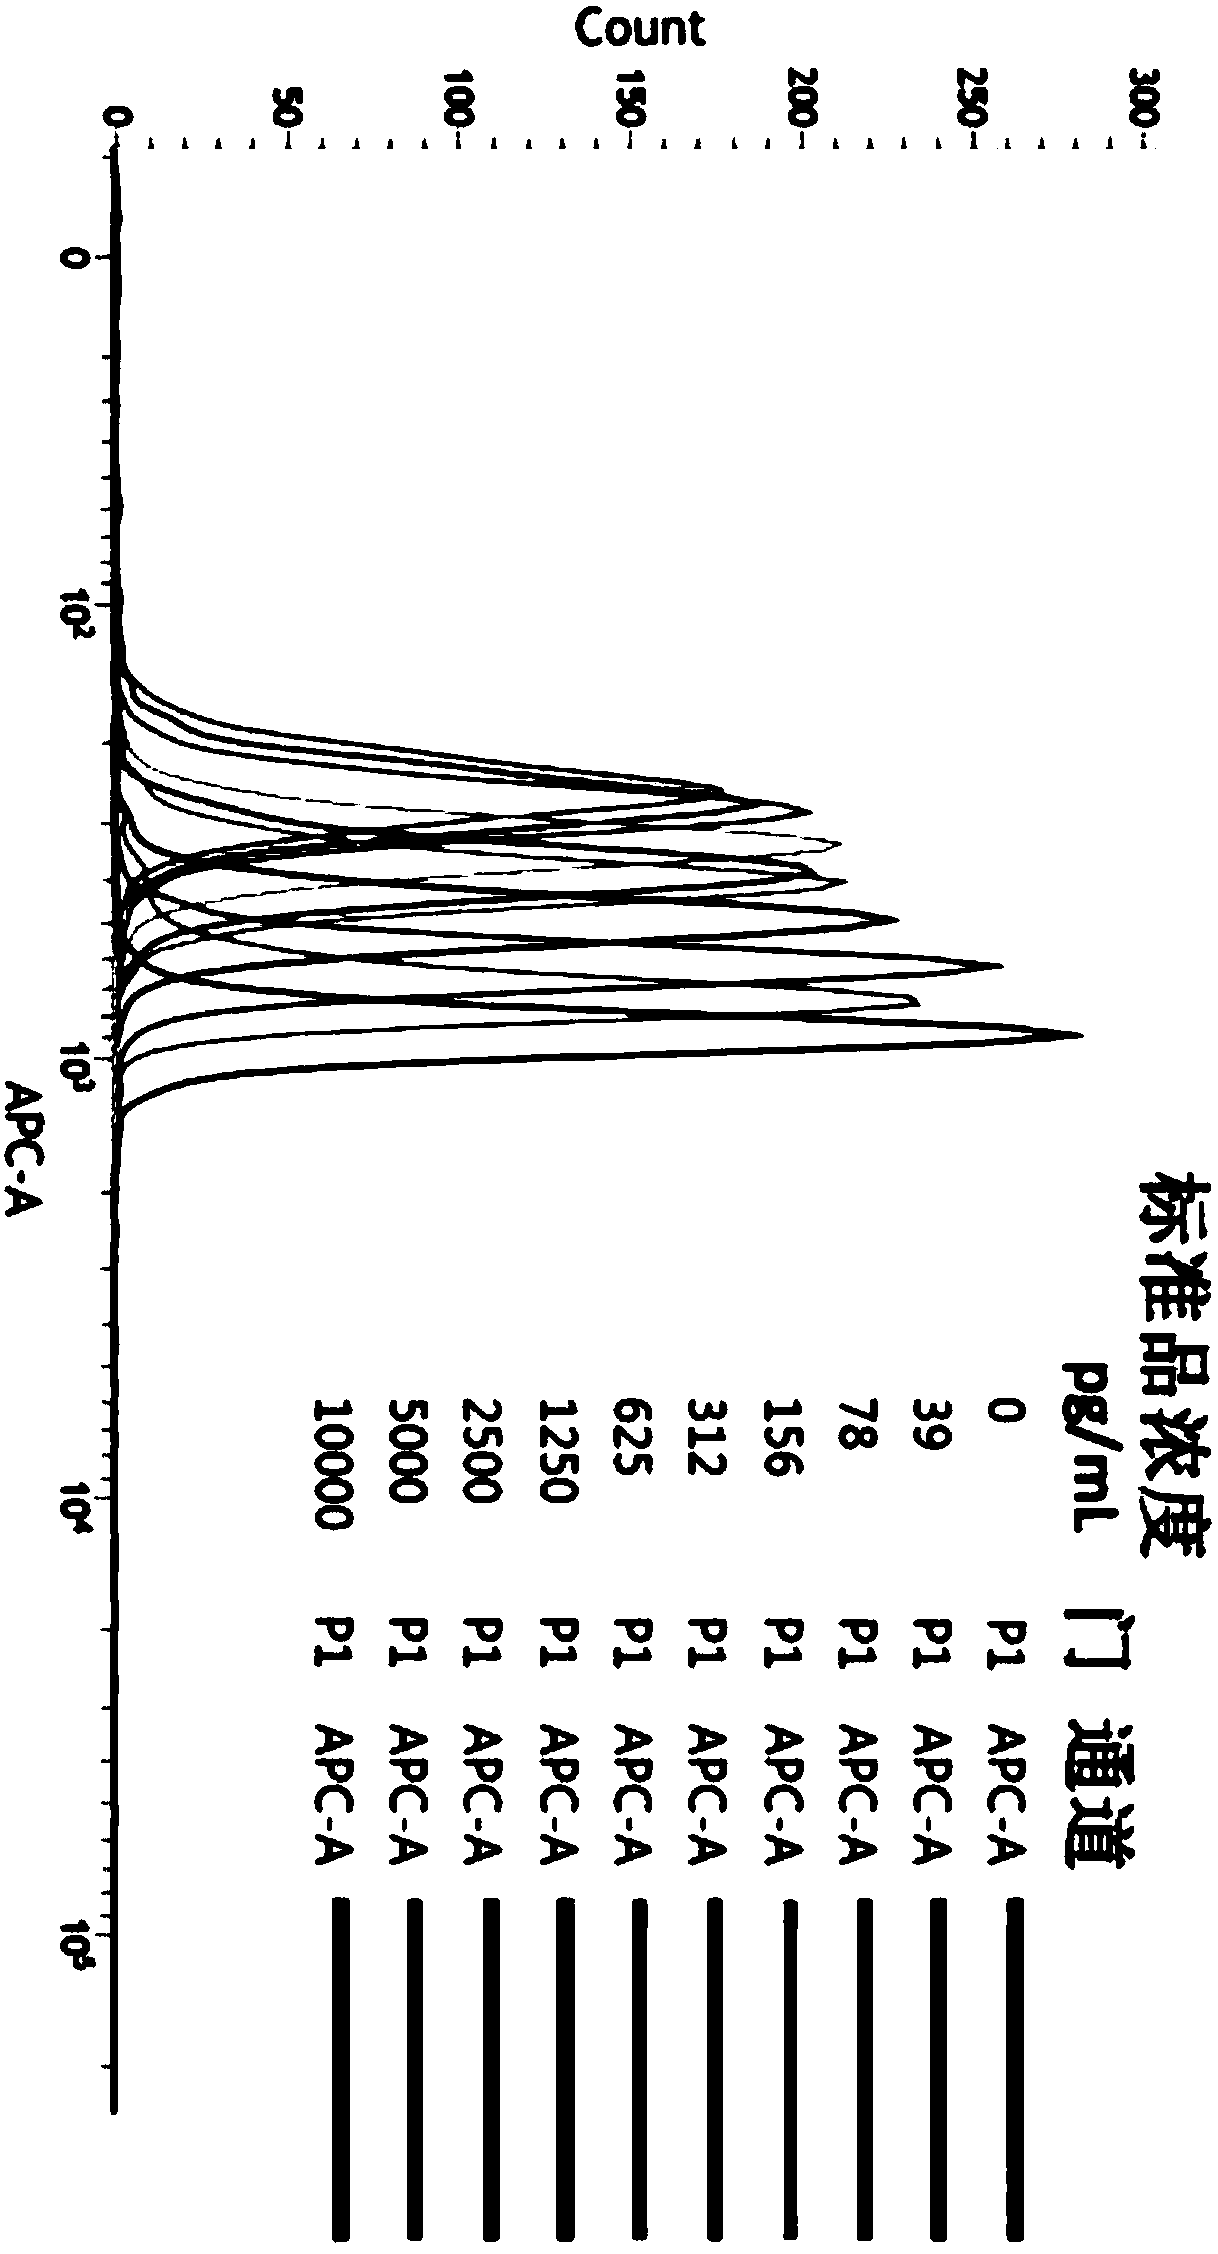 Micro-sphere double-antibody sandwich detection method and kit for detecting soluble FAM19A4 protein